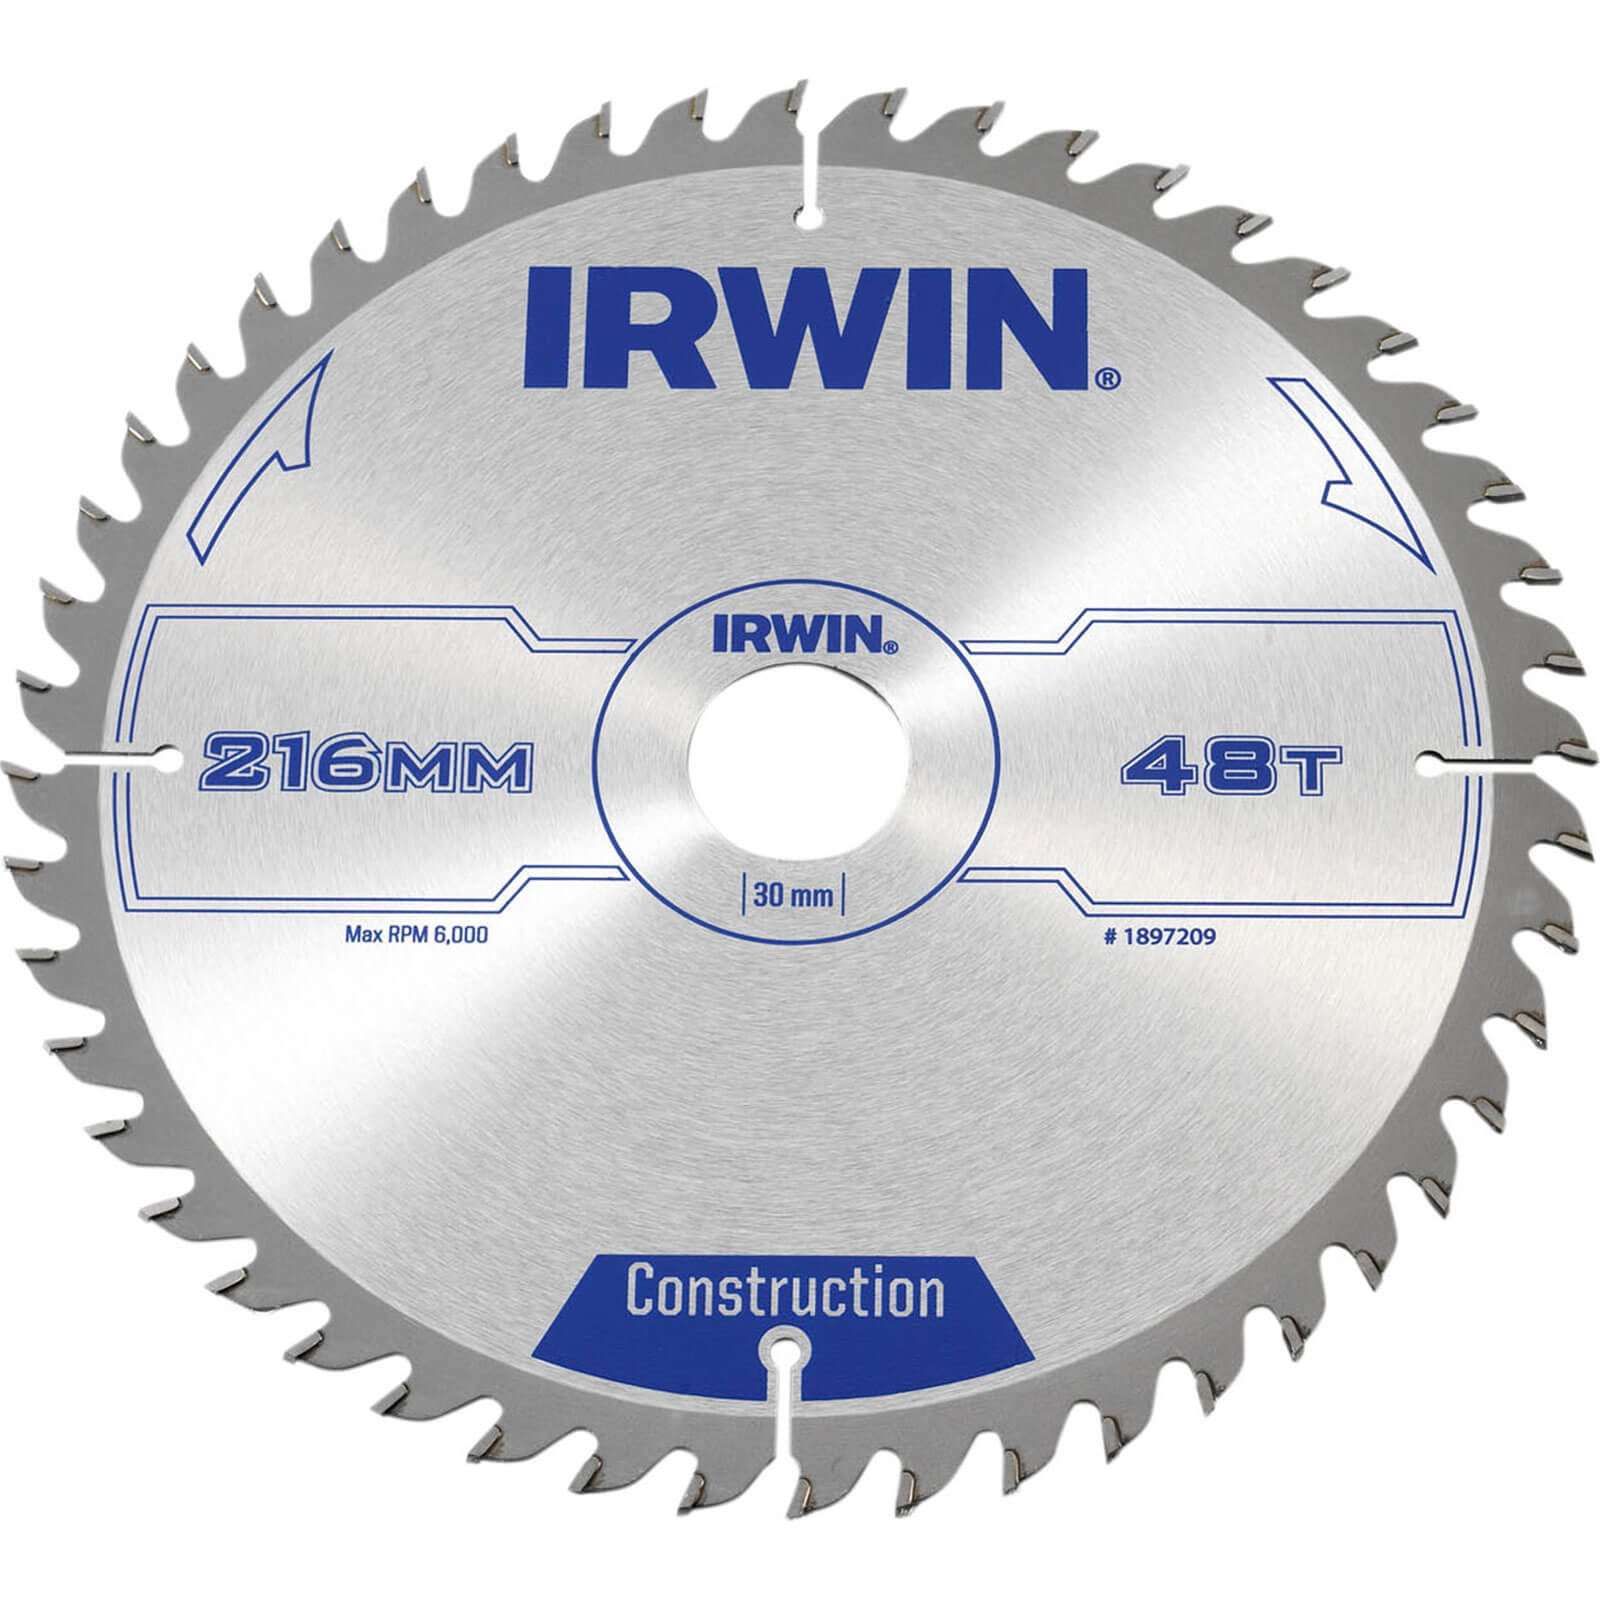 Photo of Irwin Atb Construction Circular Saw Blade 216mm 48t 30mm